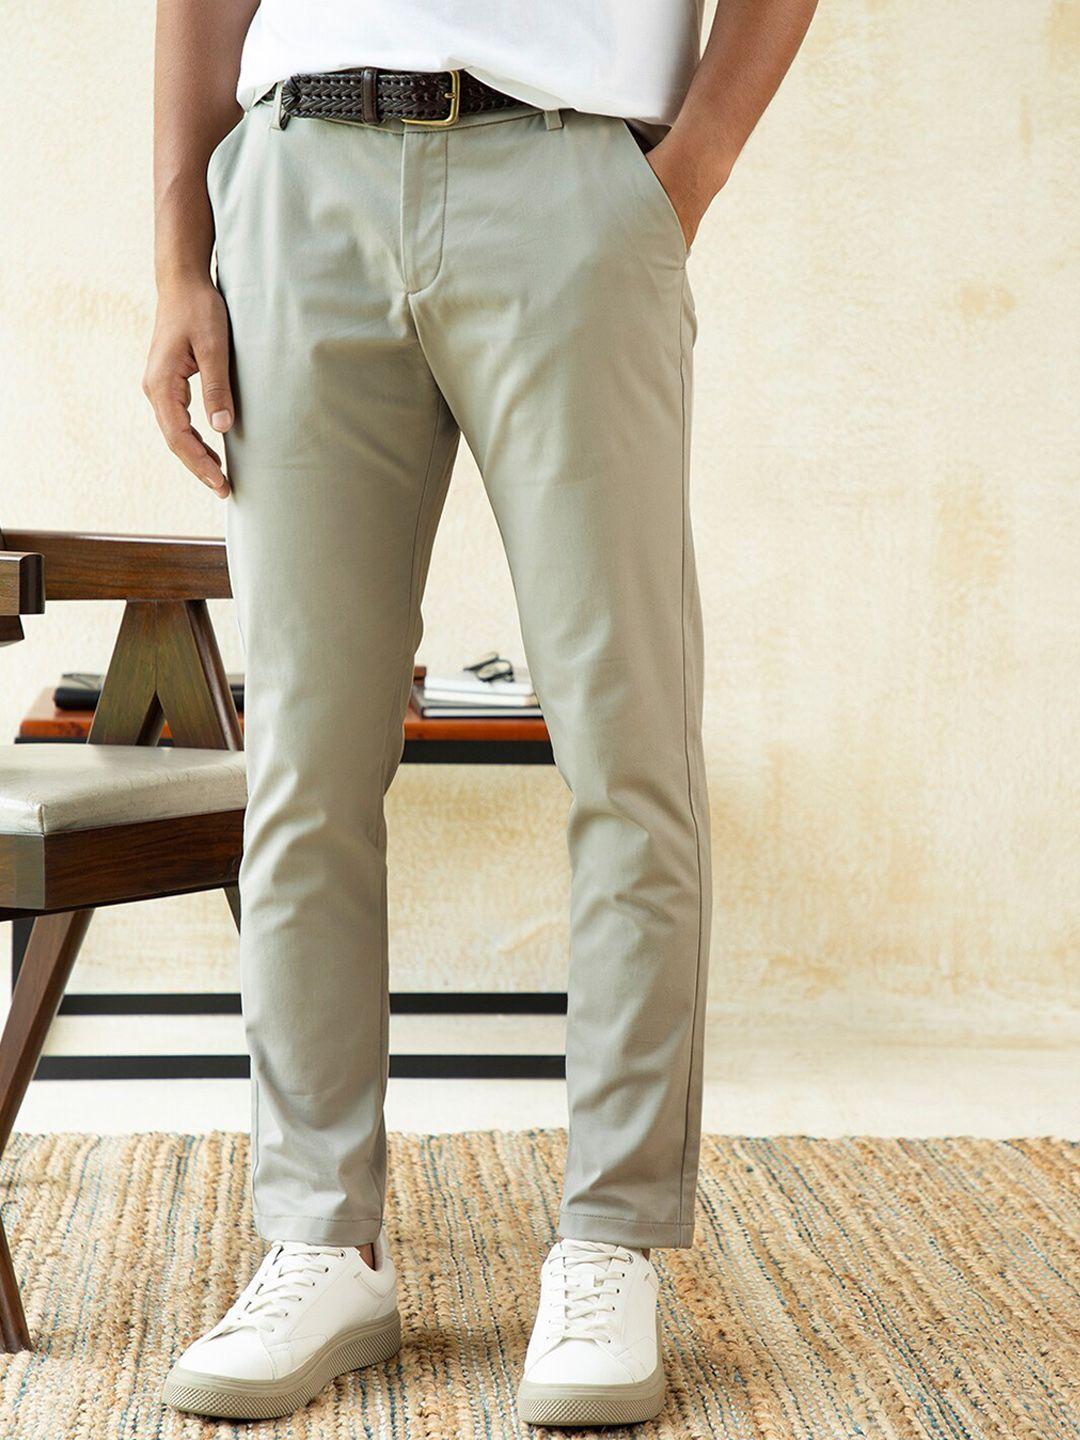 andamen men grey solid chinos trousers